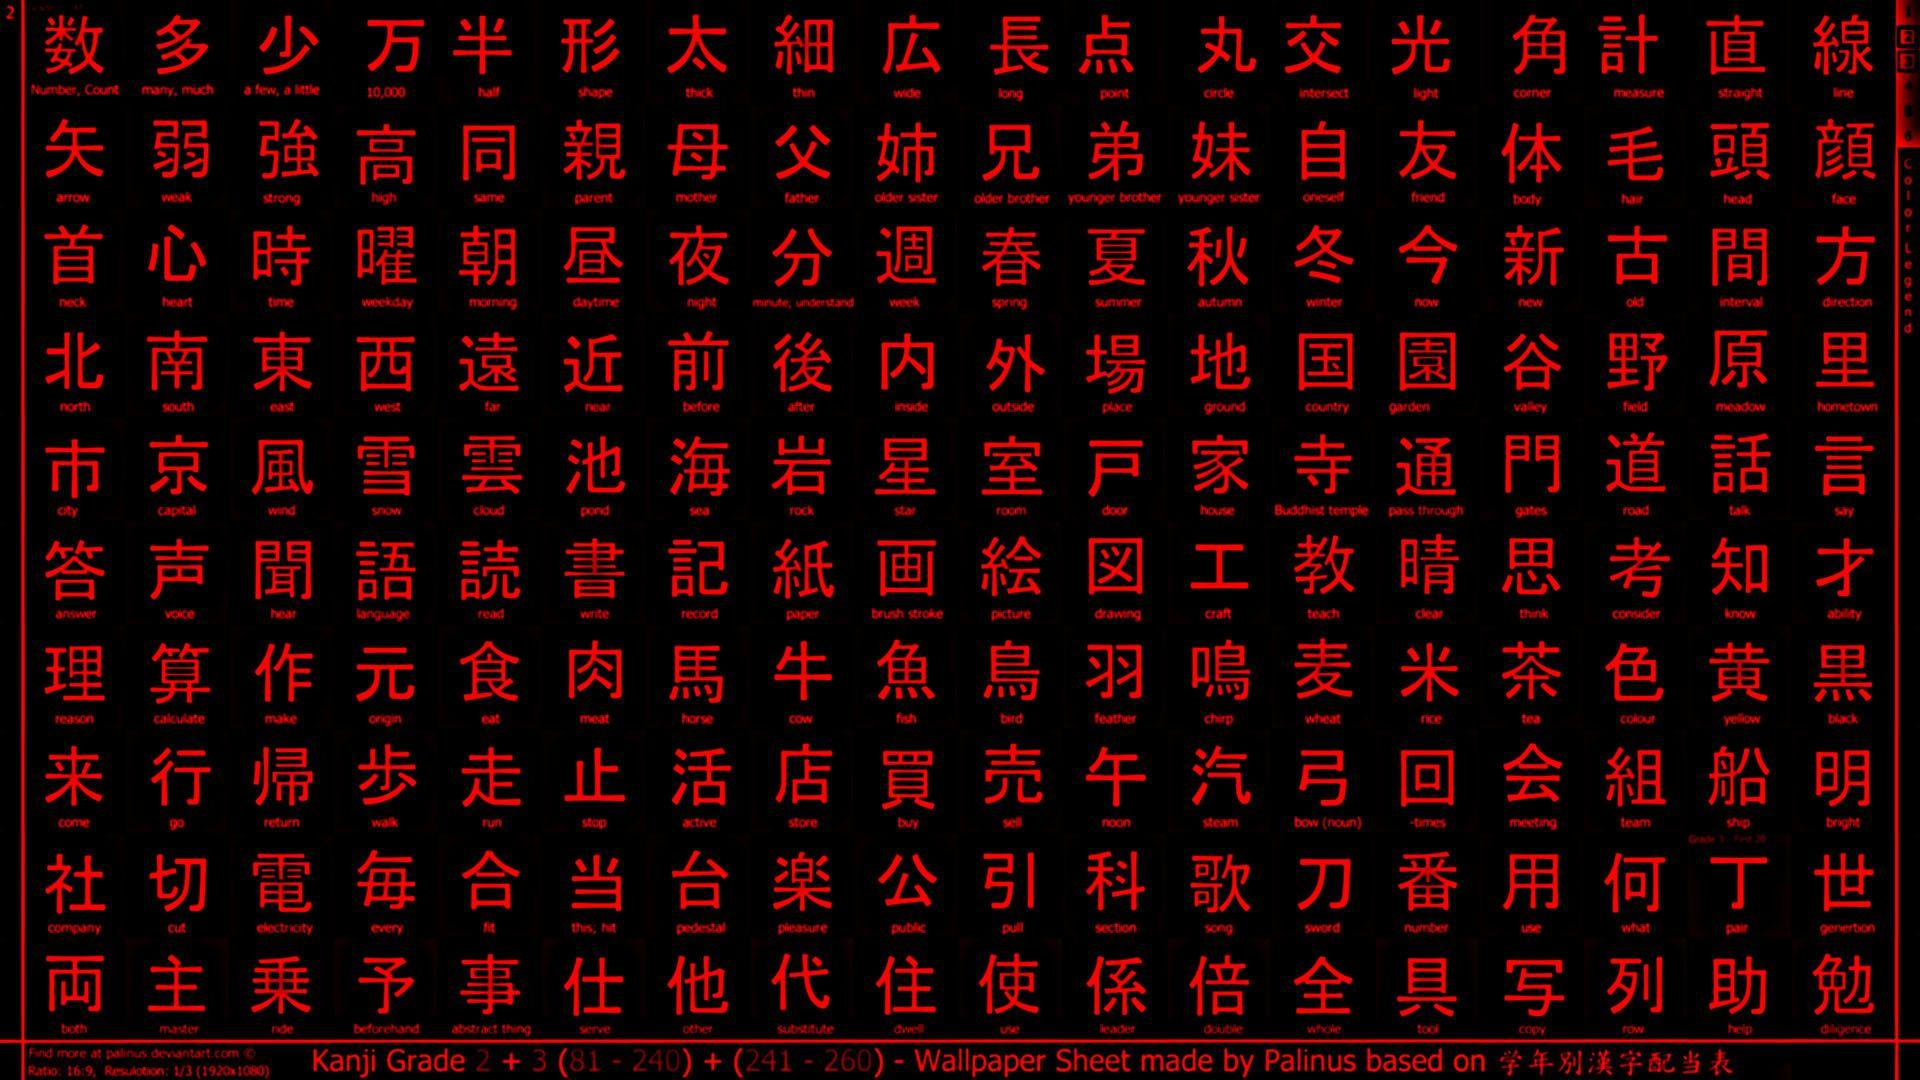 My new wallpaper is helping me a lot learning kanji. What do you guys think?